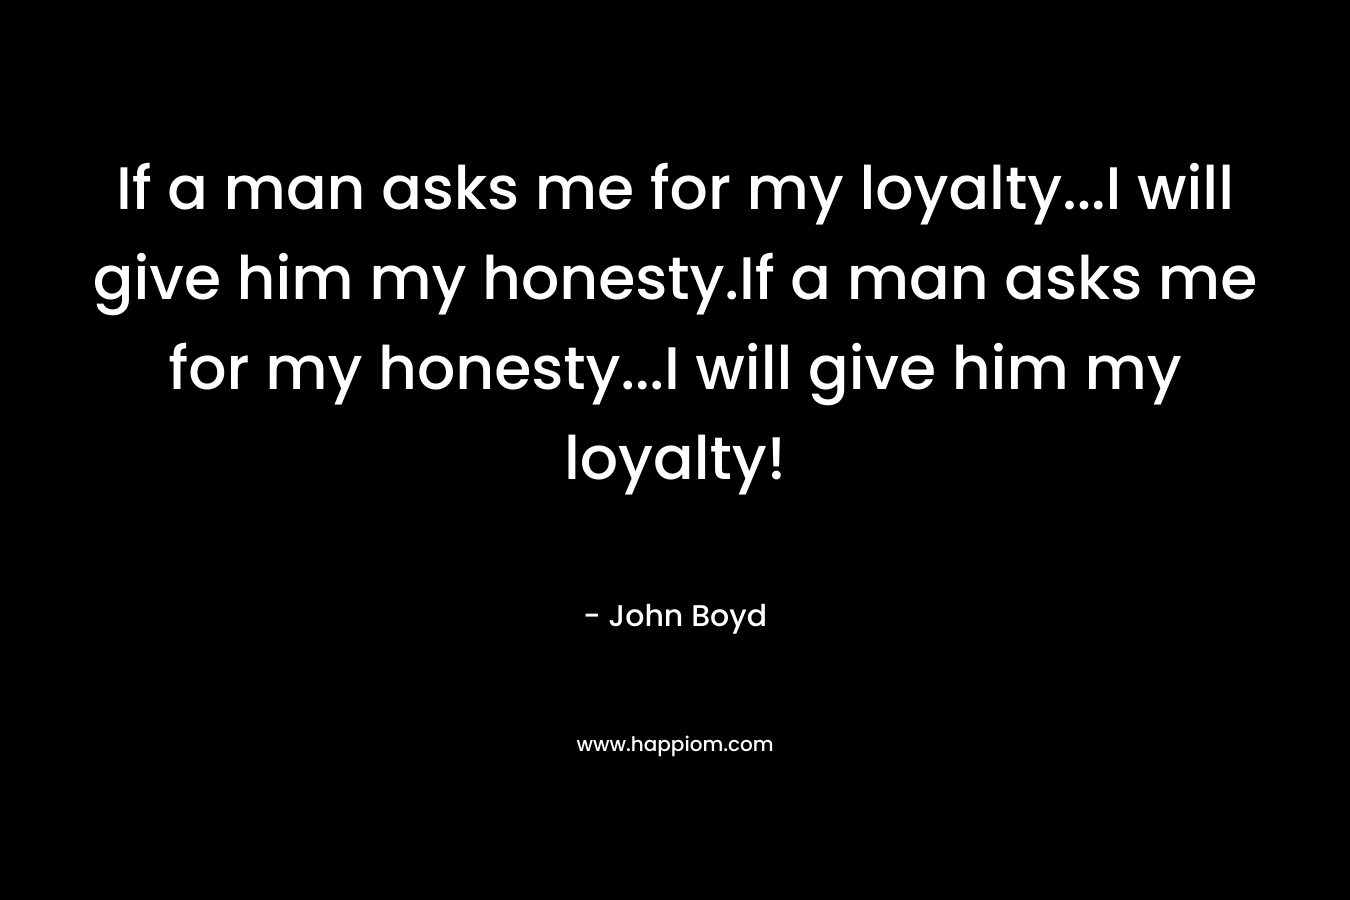 If a man asks me for my loyalty...I will give him my honesty.If a man asks me for my honesty...I will give him my loyalty!